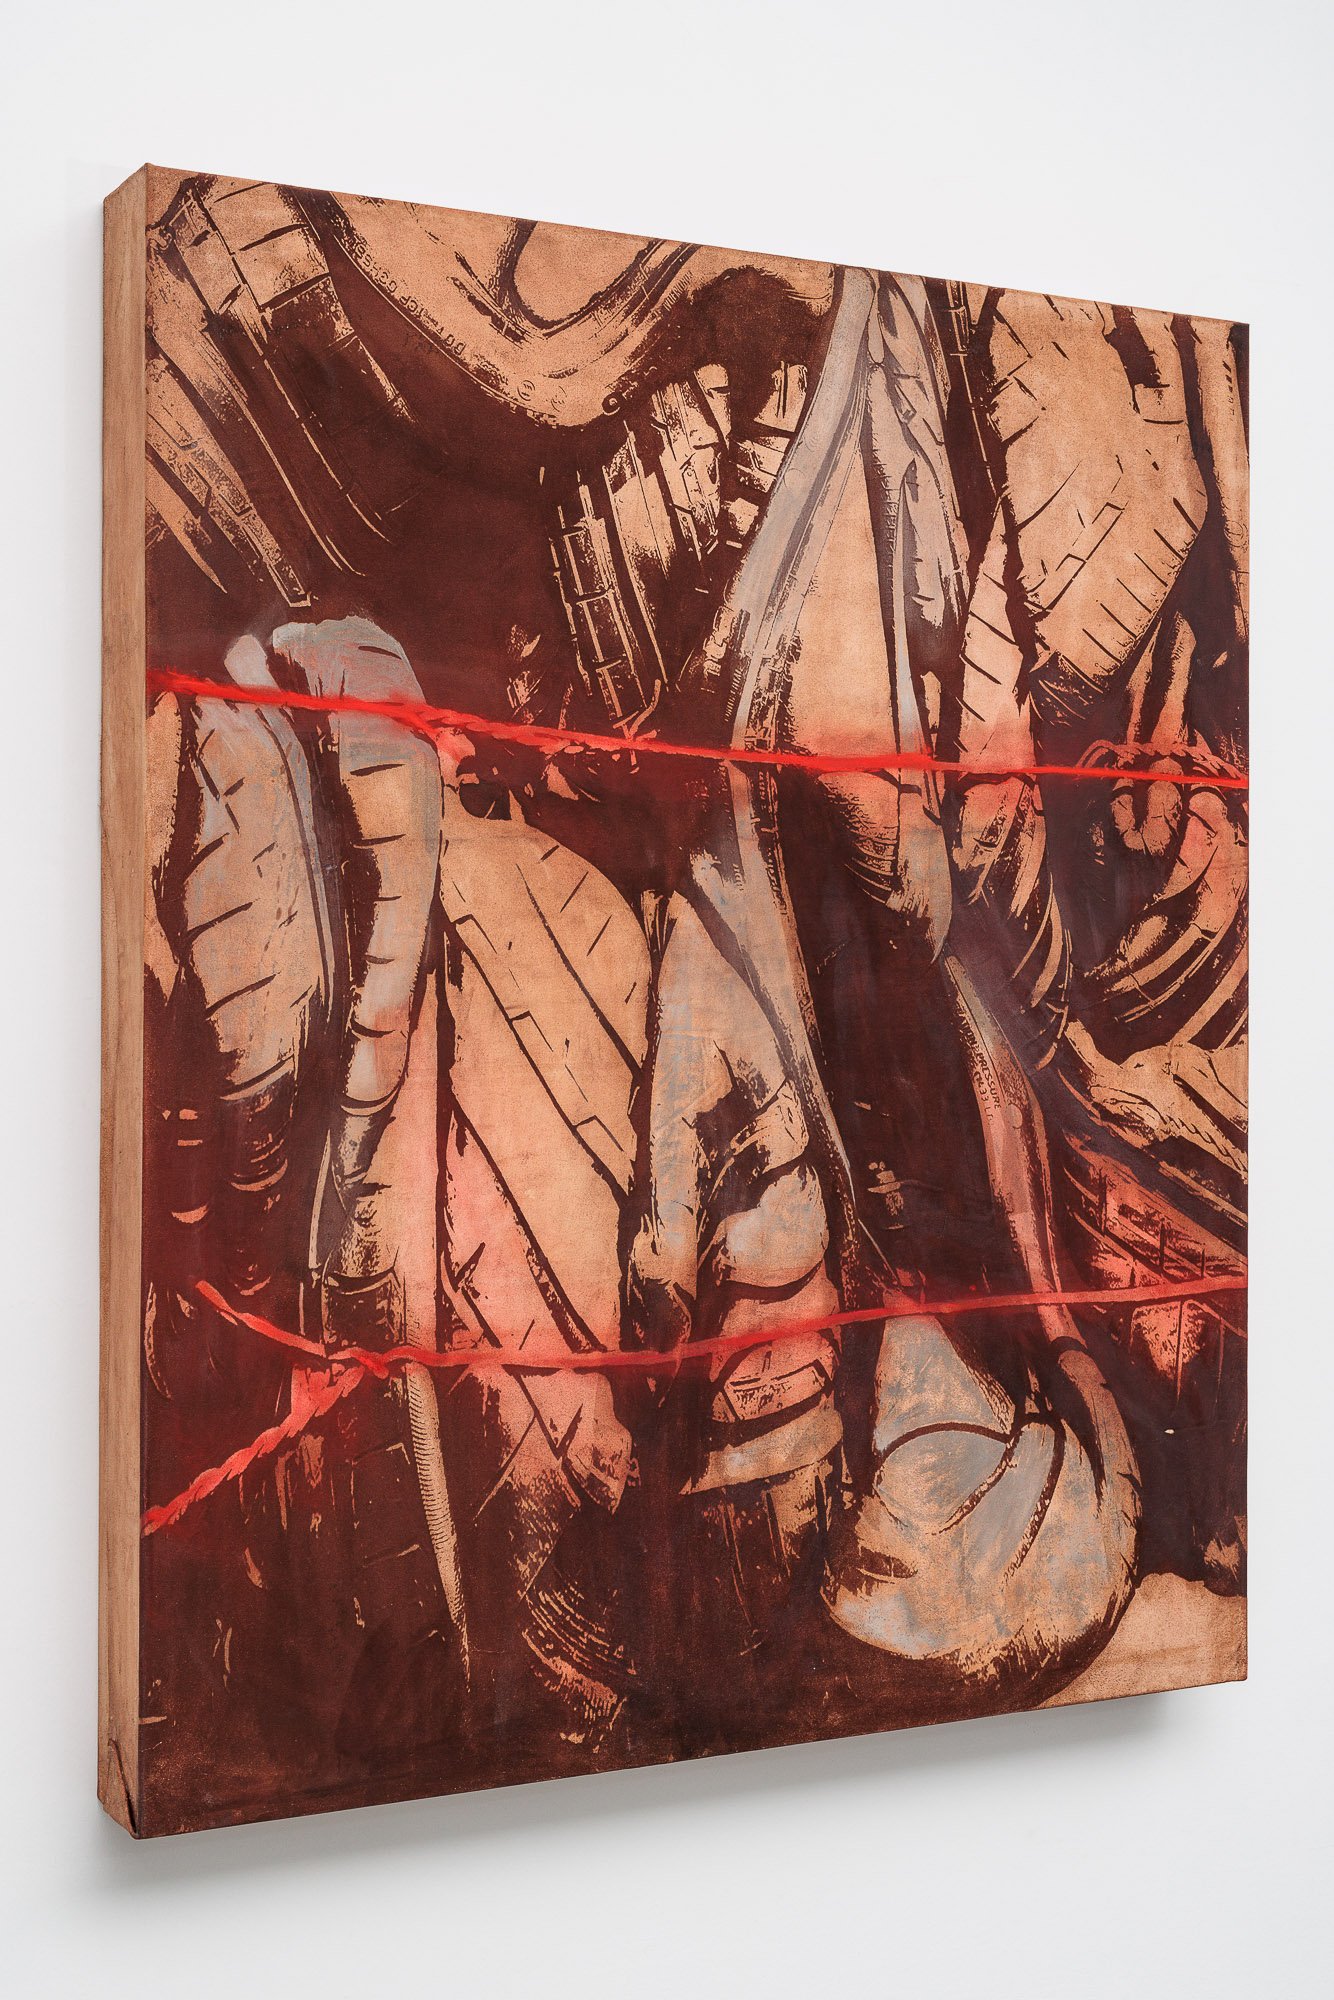 Lena HenkeCombustions 22 [Penetration damage], 2024Laser etched leather, pigment on wooden panel150 x 125 x 15 cm